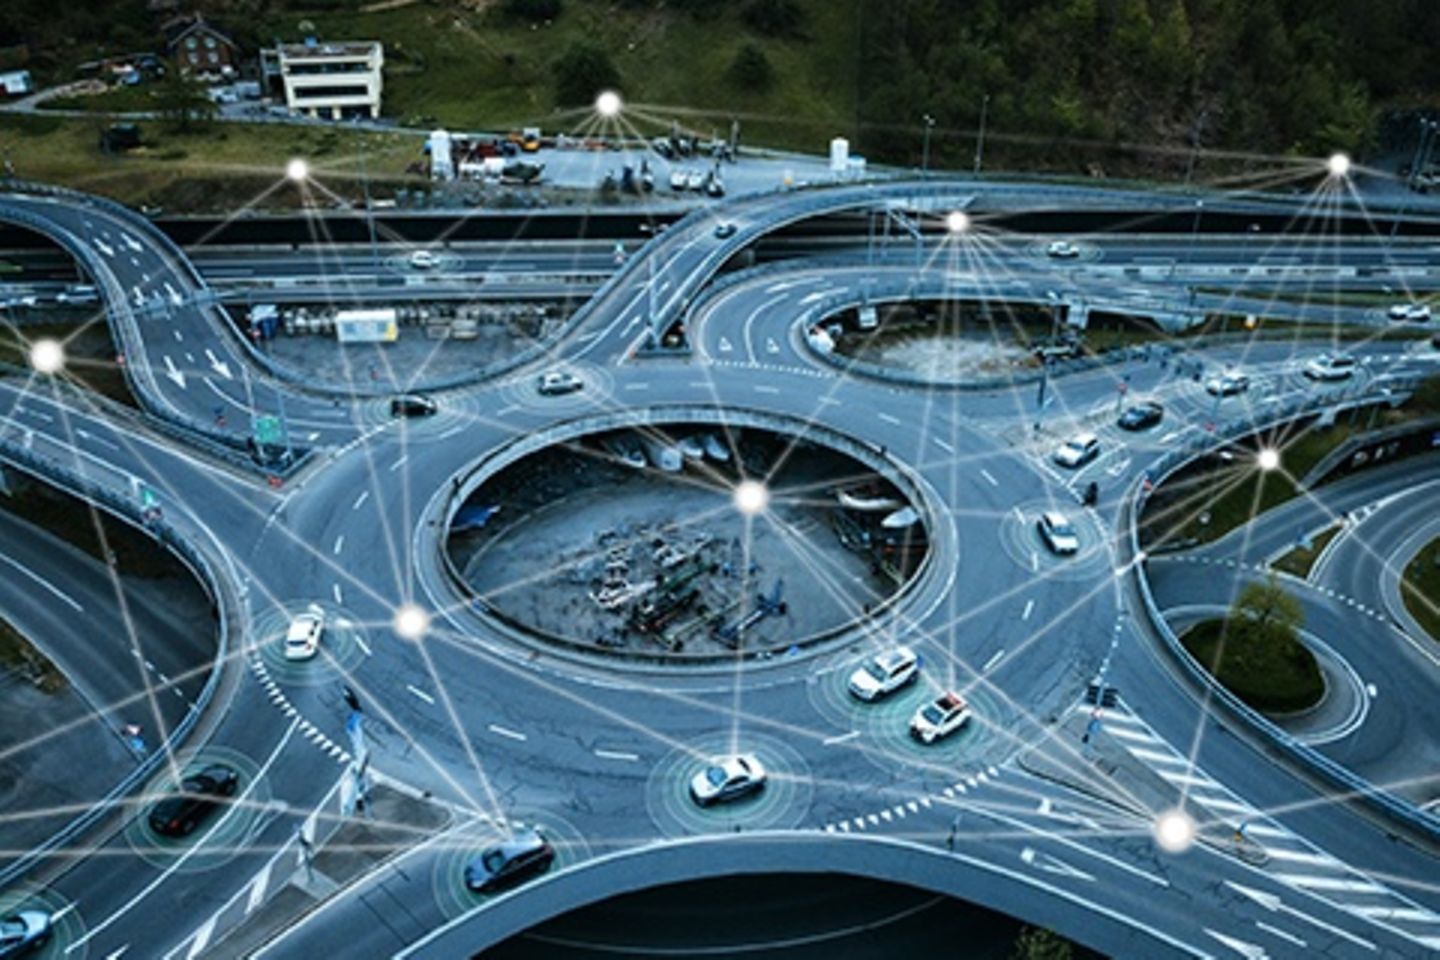 Cars driving in traffic circles receive over-the-air updates